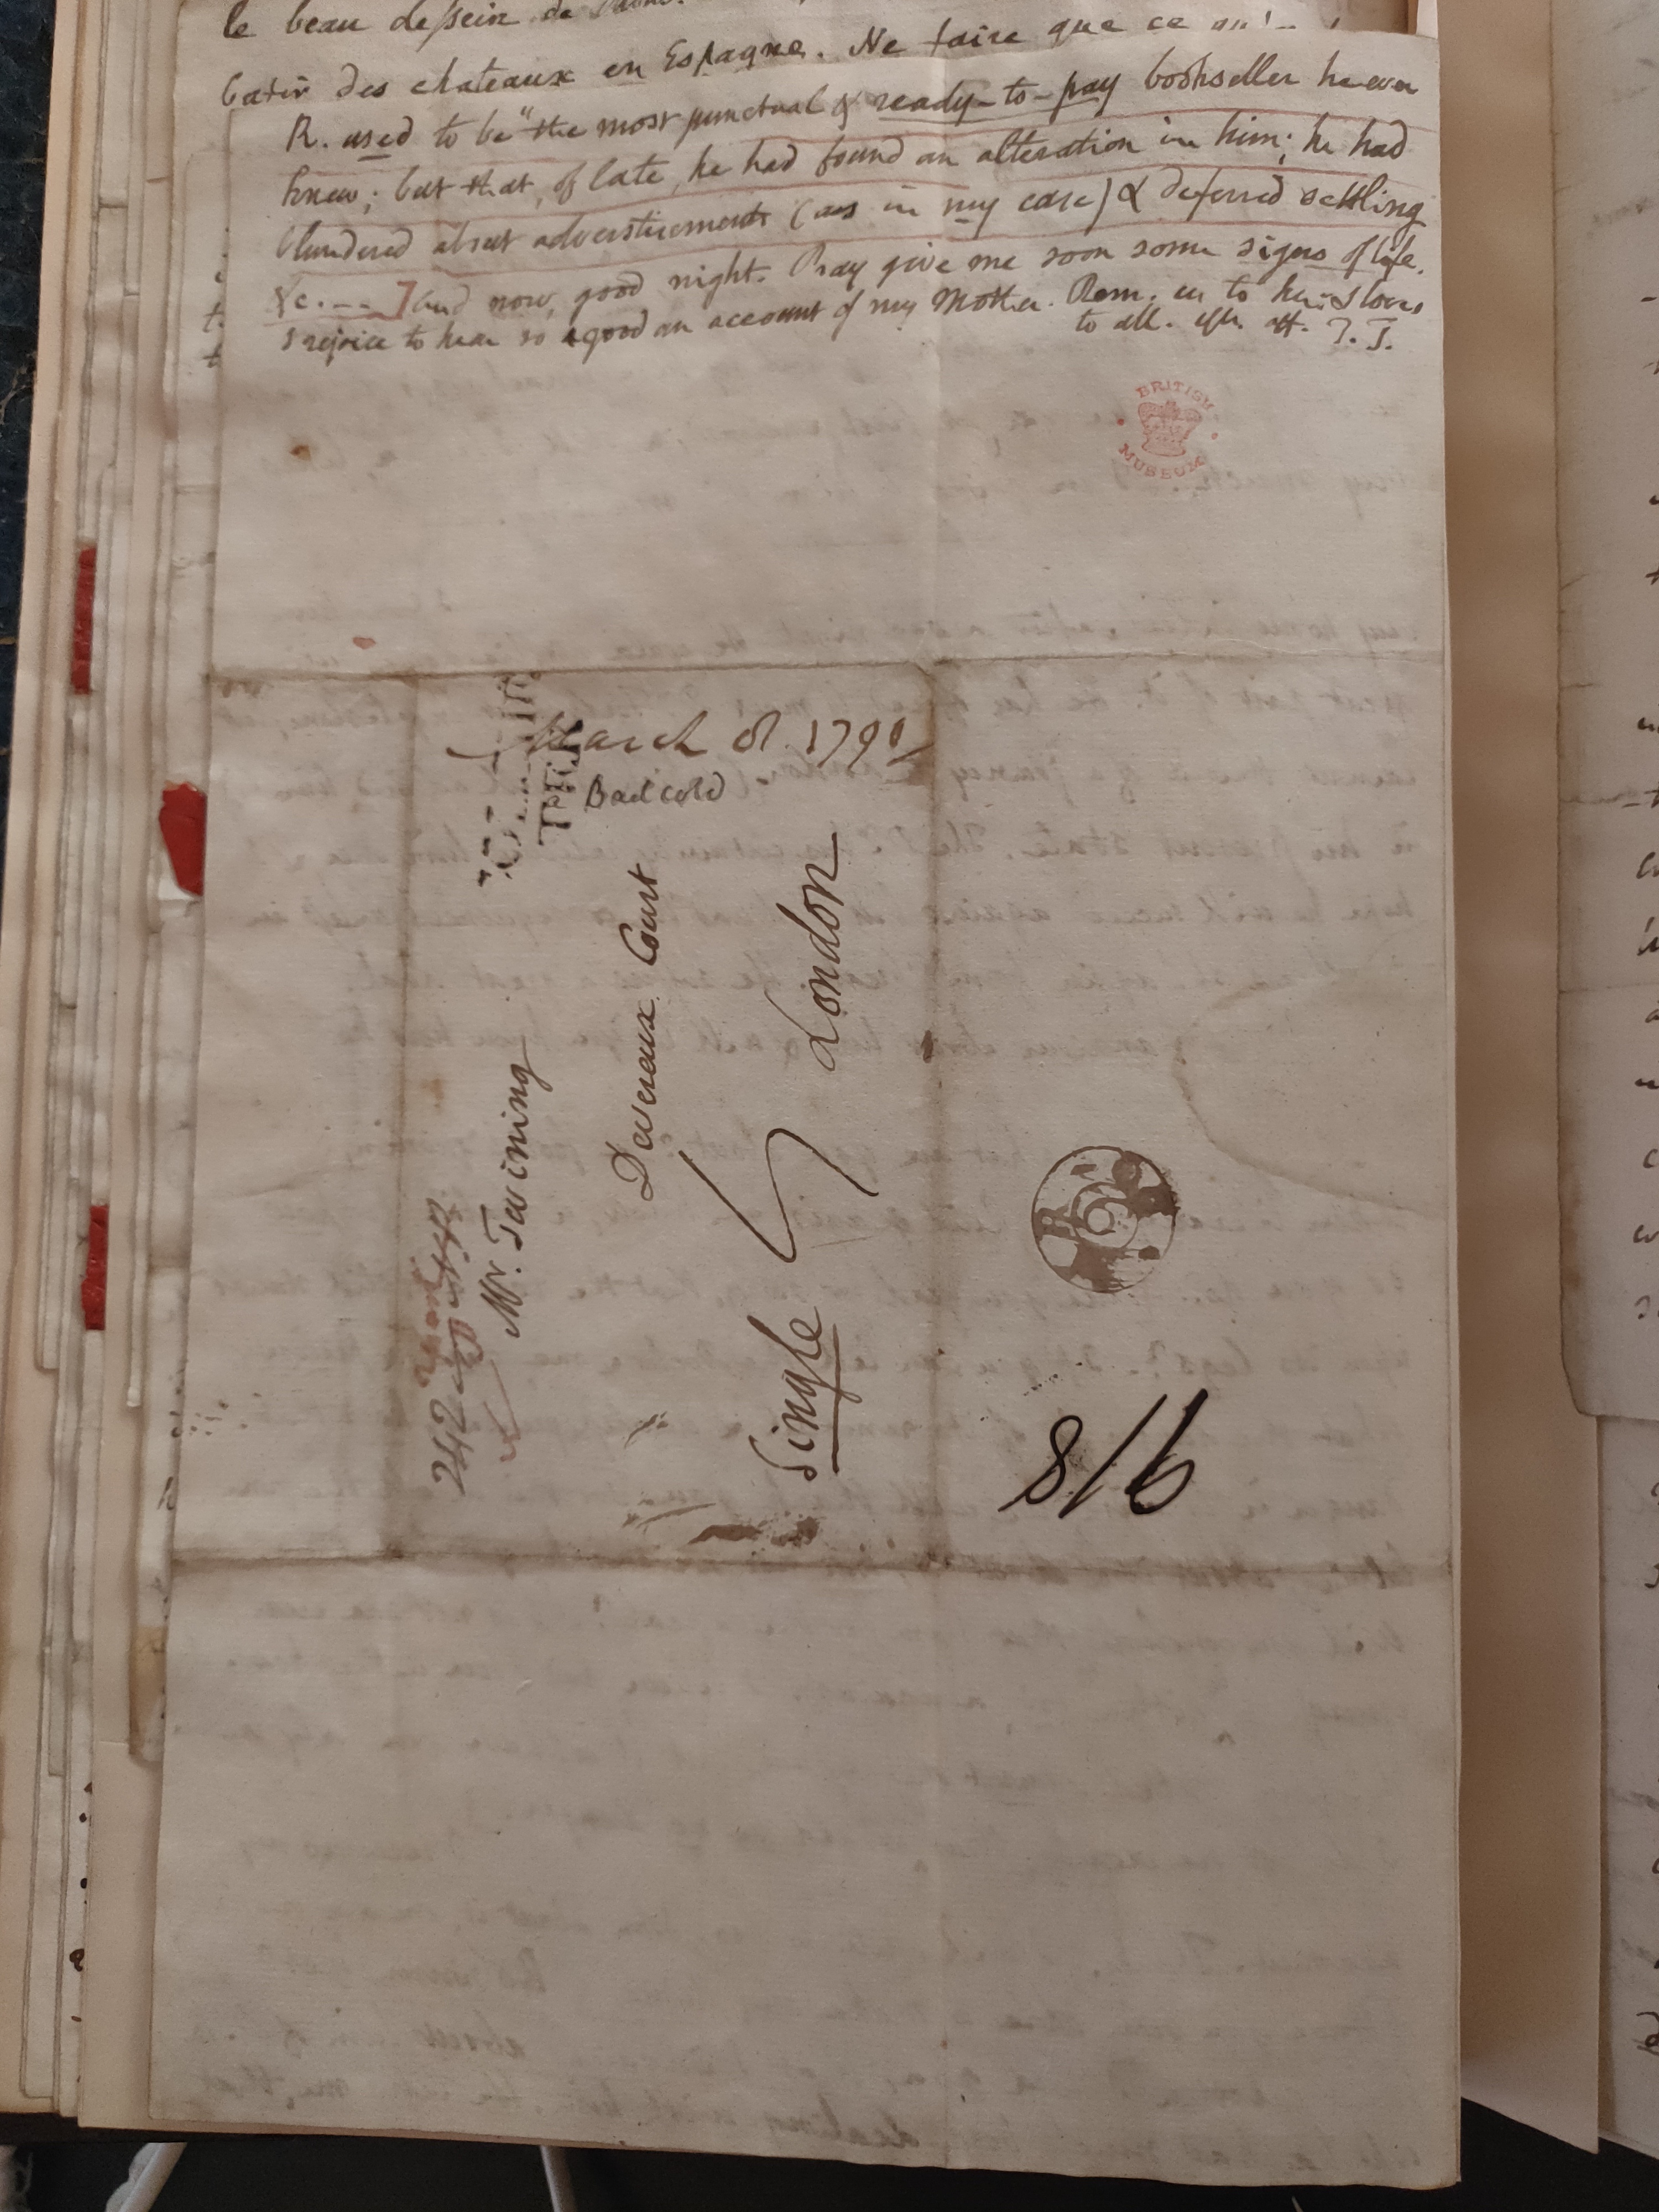 Image #4 of letter: Thomas Twining to Daniel Twining, 8 March 1790